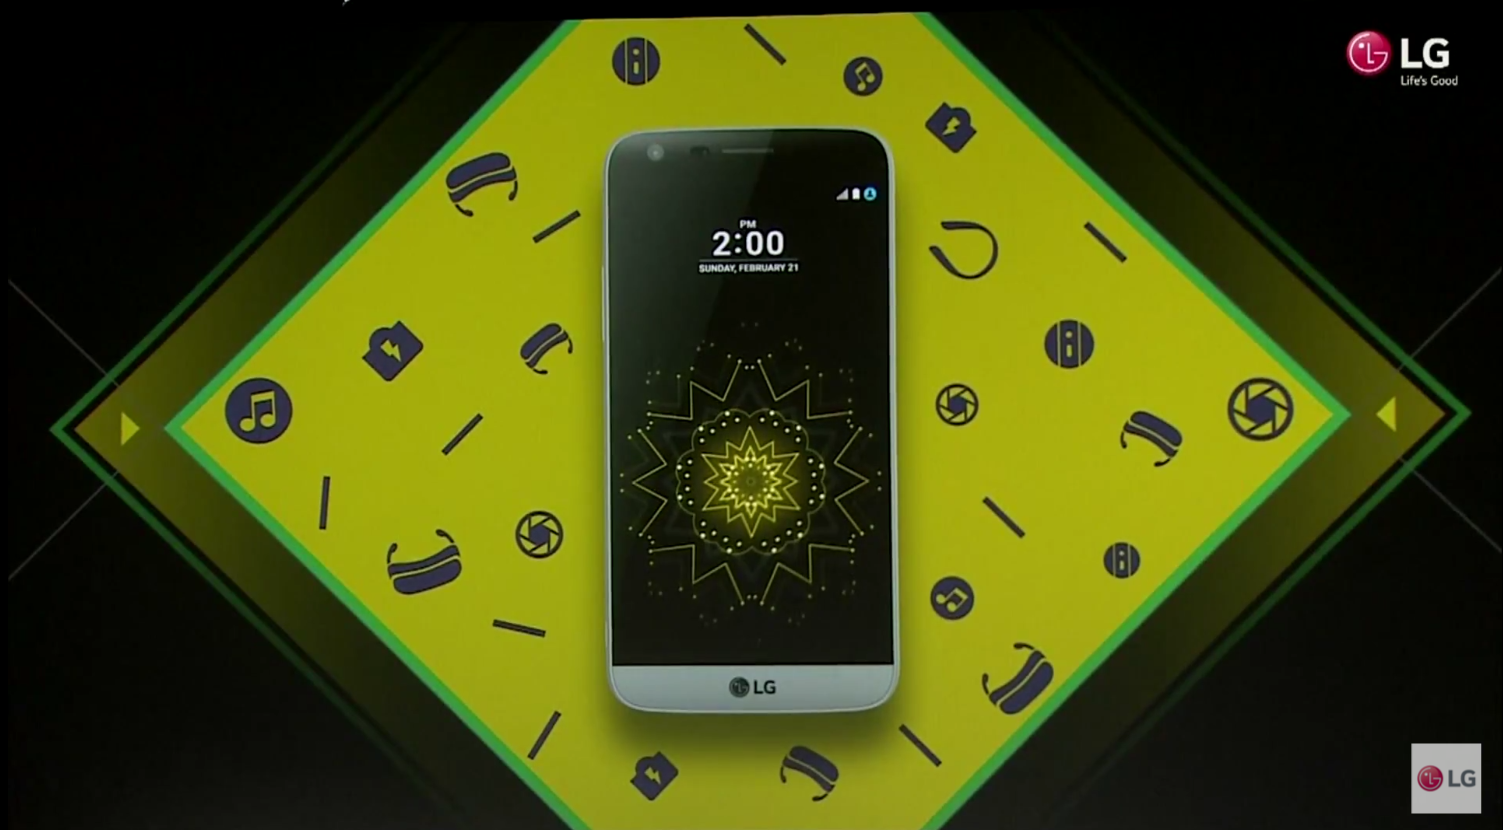 lg-unveils-modular-g5-with-awesome-add-ons-insane-features-image-cultofandroidcomwp-contentuploads201602lg-g5-2-png